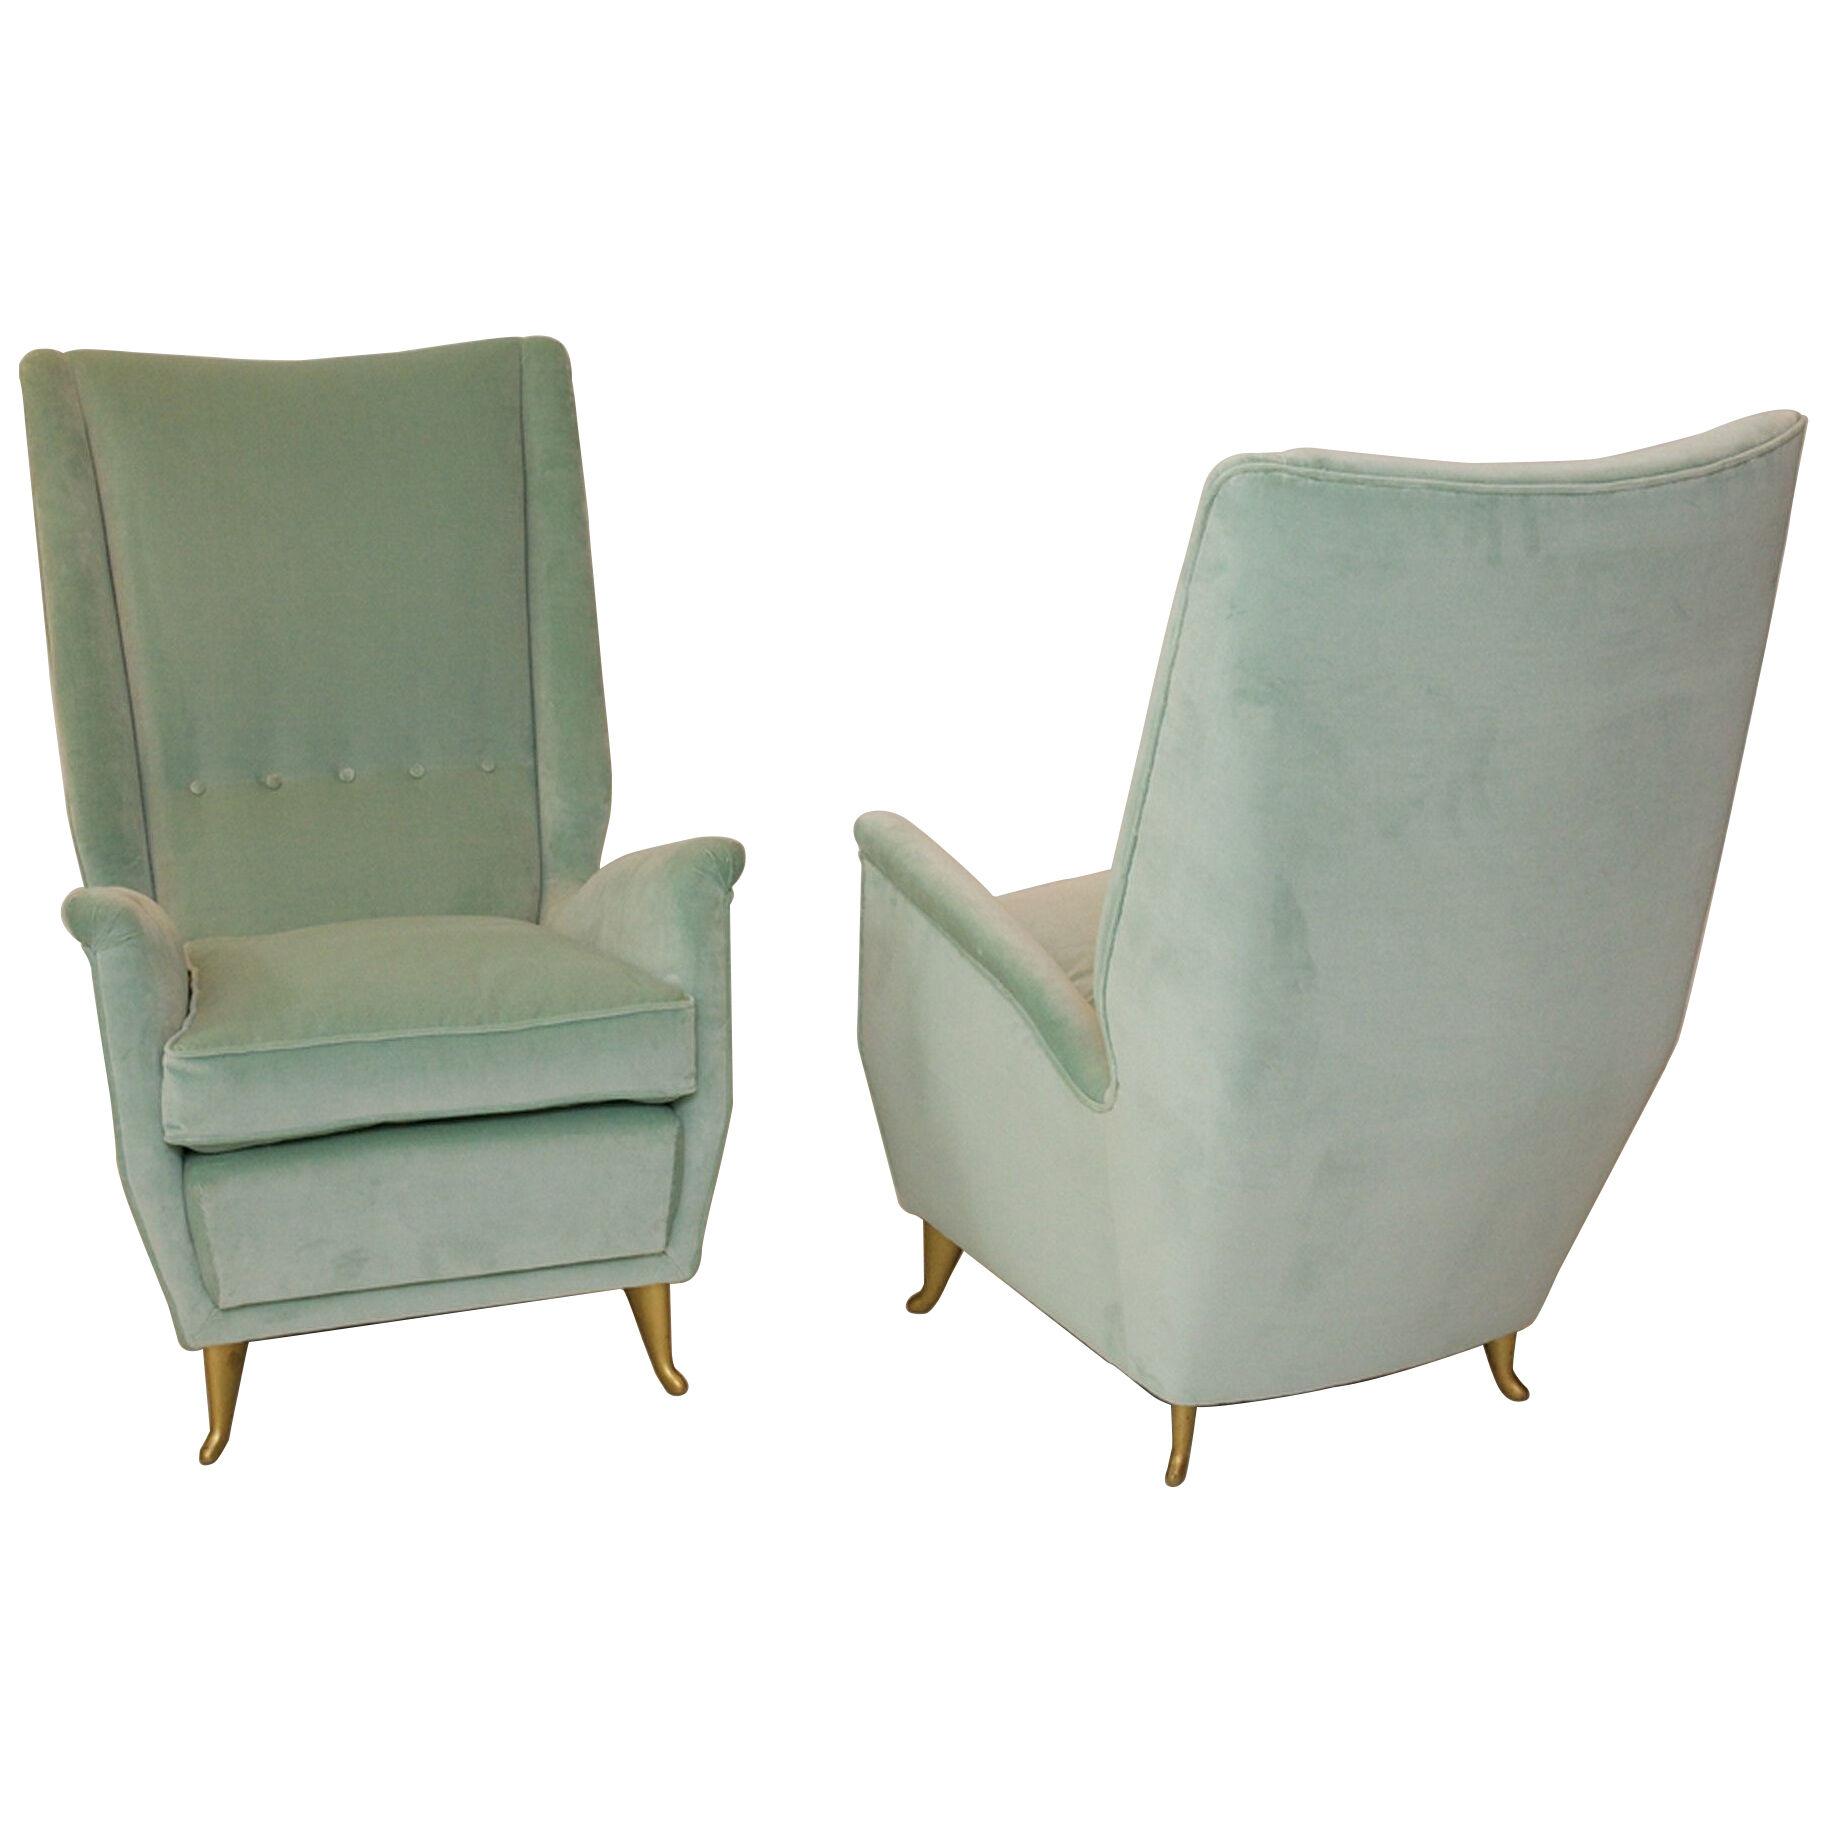 Pair of Mid Century Modern armchairs by I.S.A. from a design by Gio Ponti